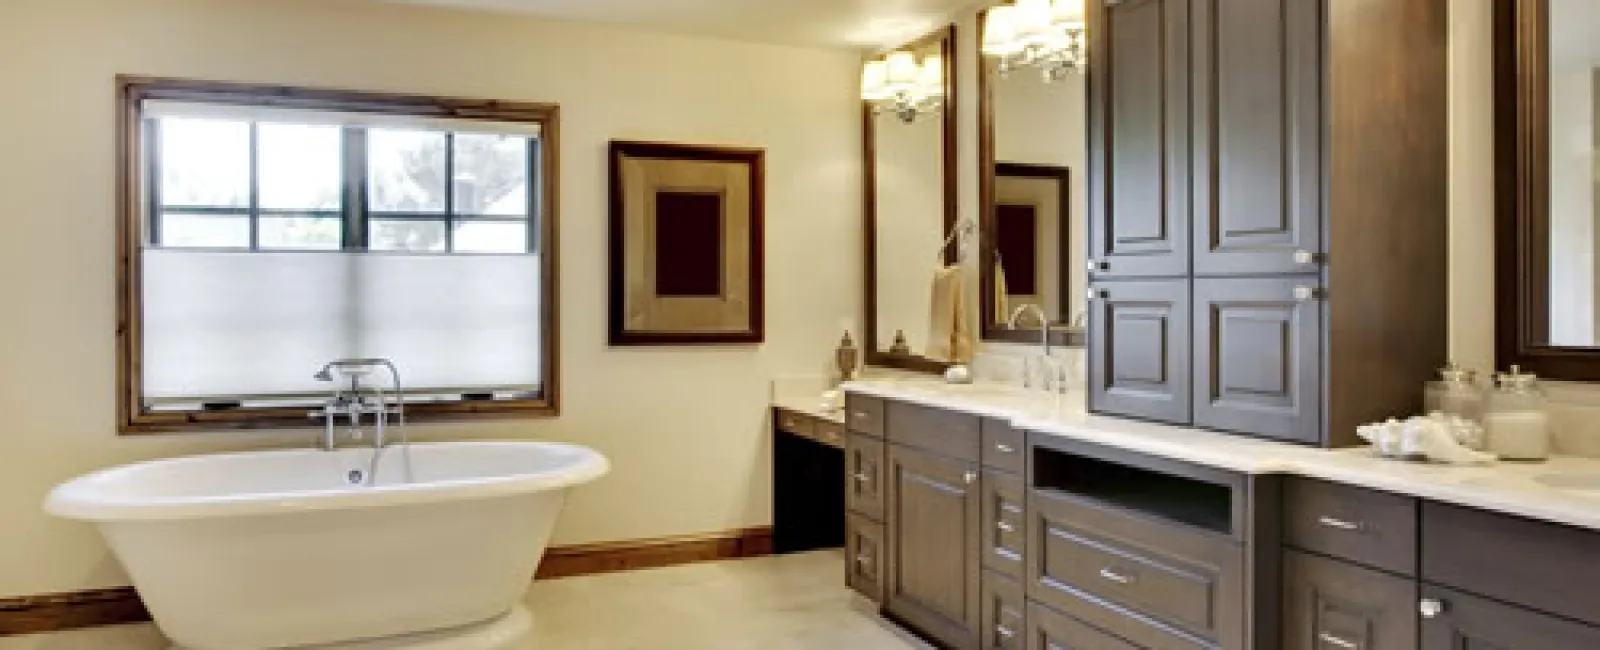 Reasons to Remodel Your Bathroom